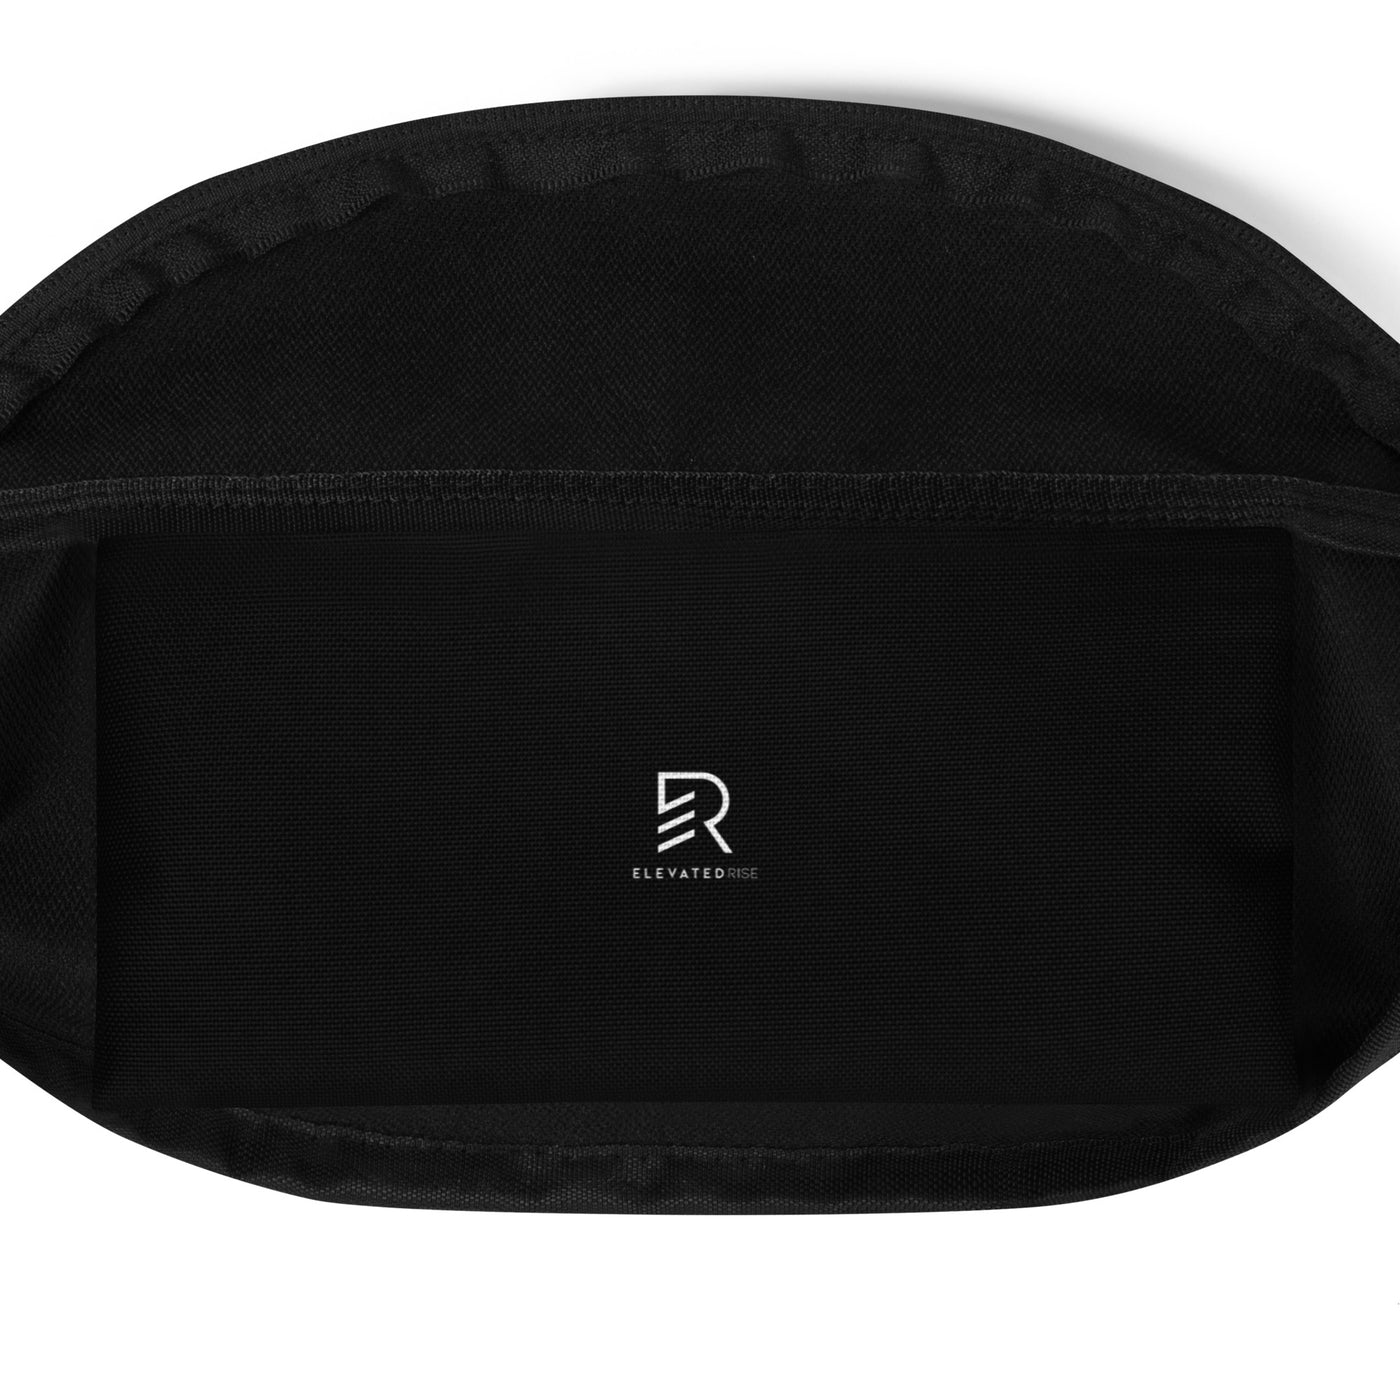 Black Fanny Pack - Focus On Your Goals